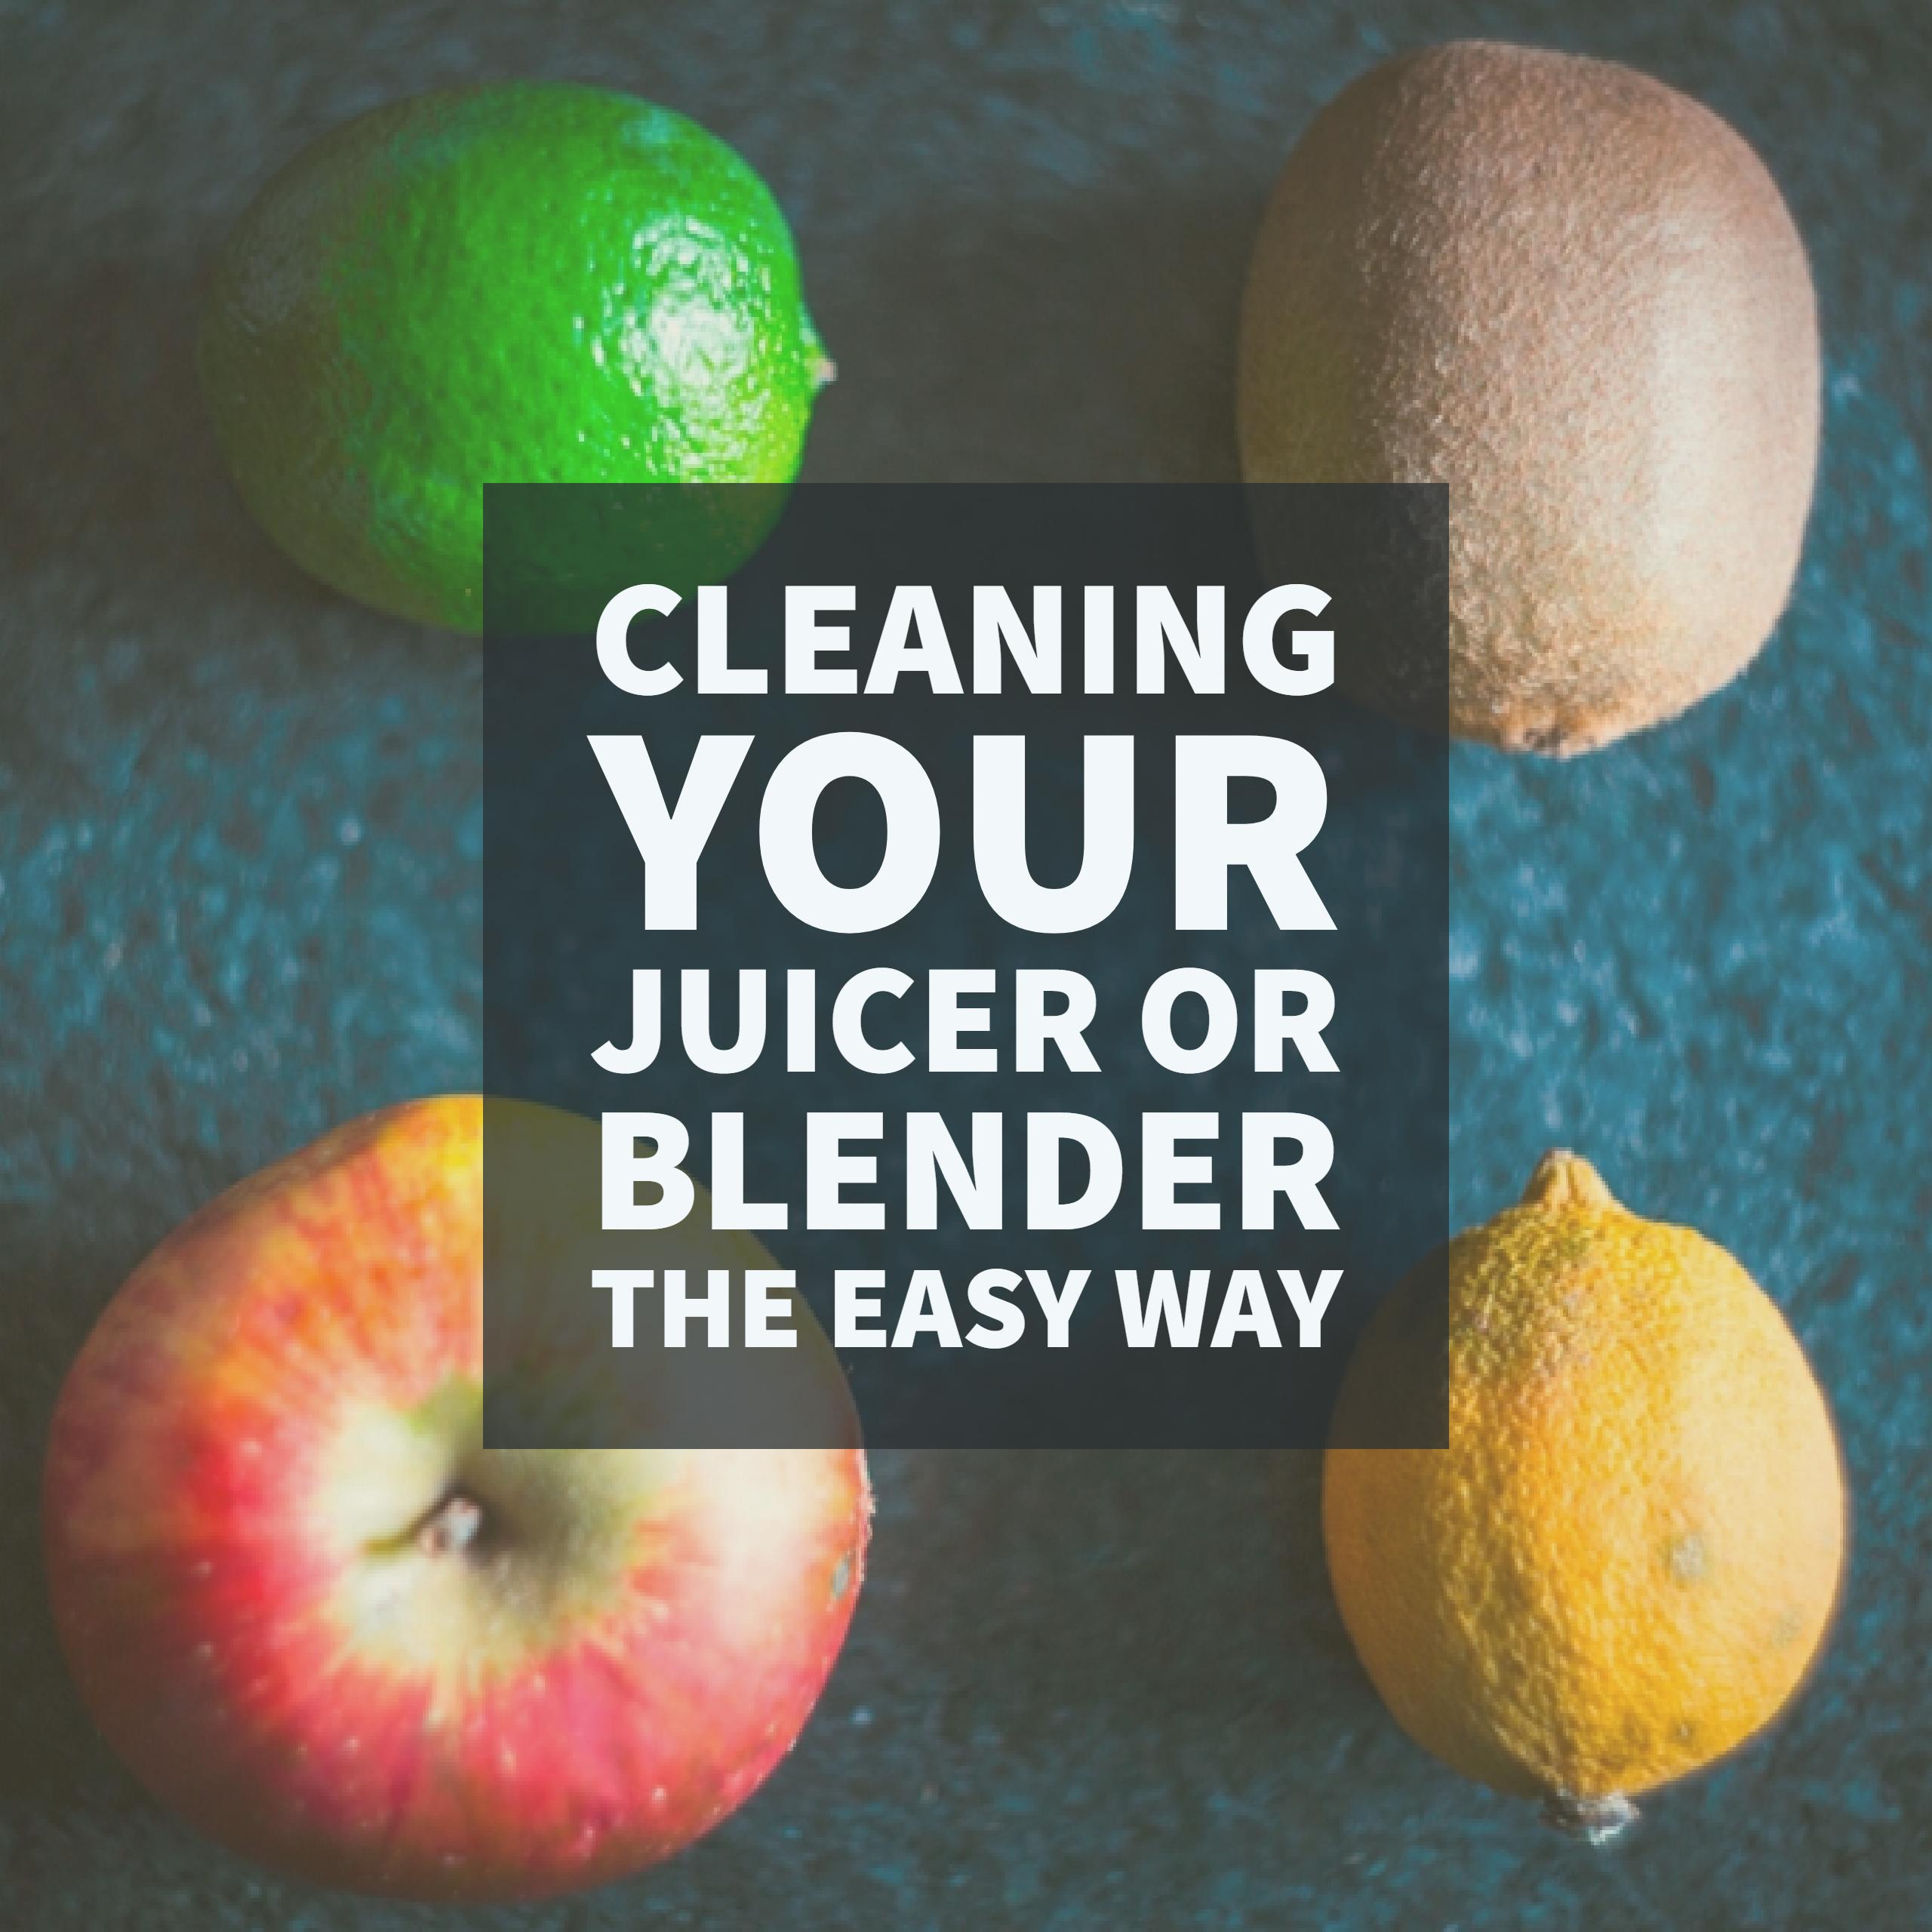 Cleaning your juicer or blender the easy way